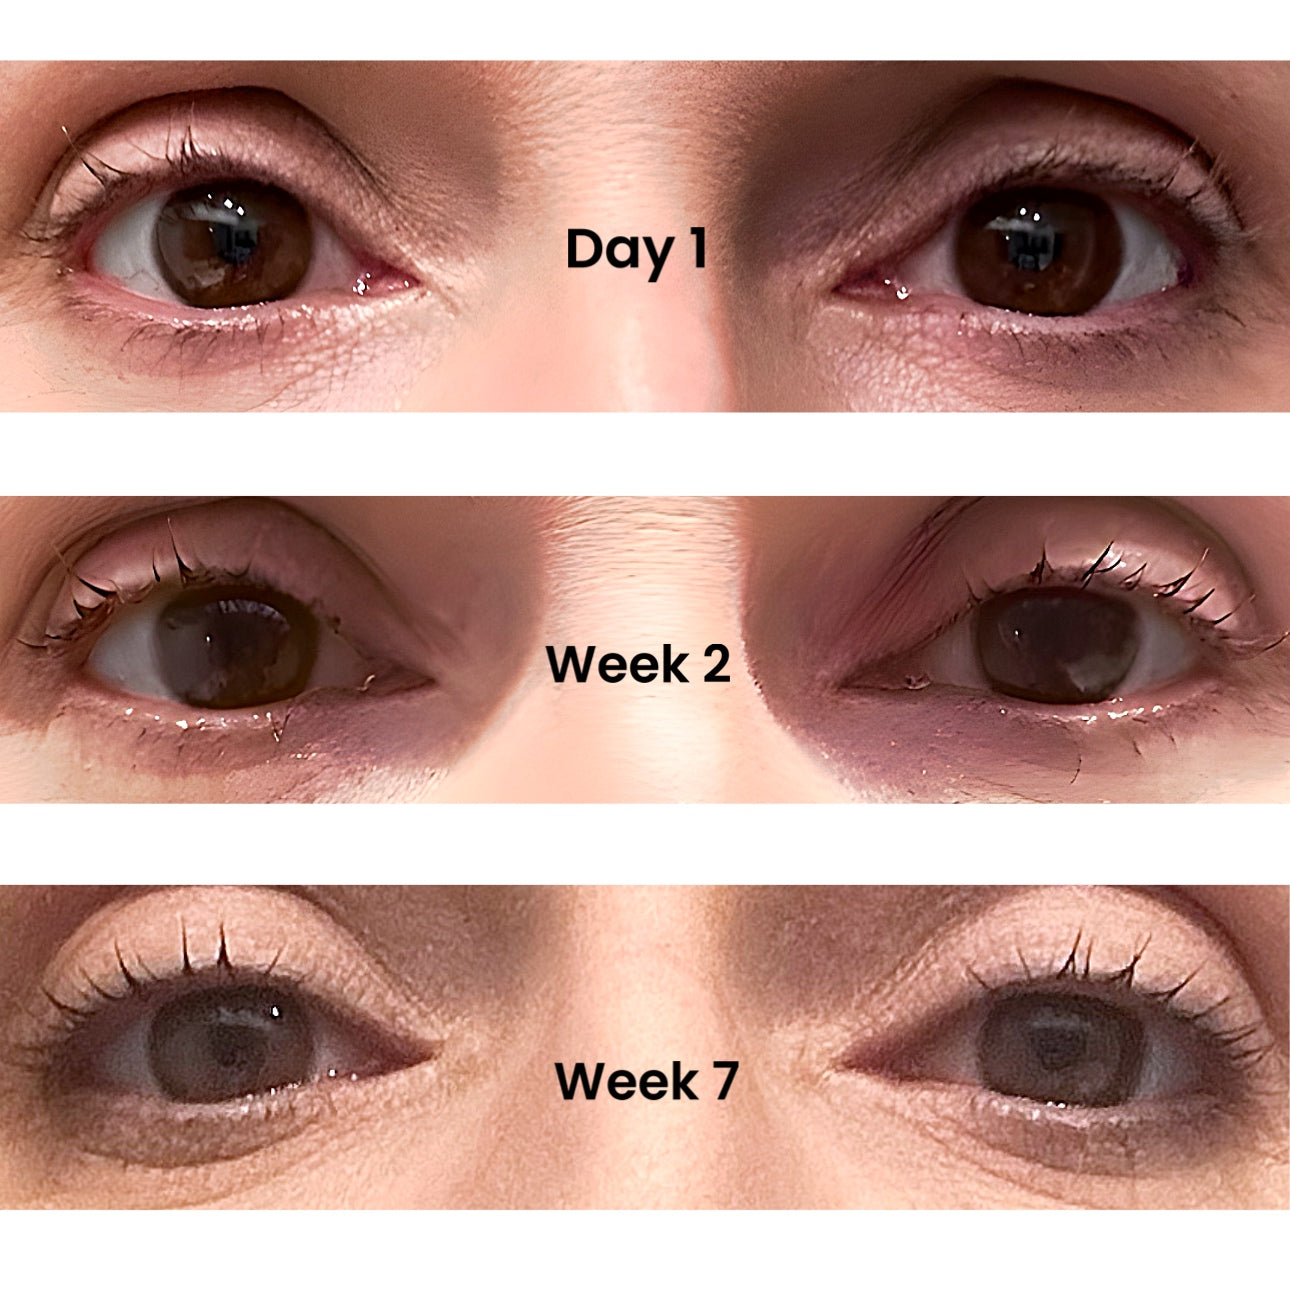 results from day 1 to week 7 using brow and lash serum twice daily